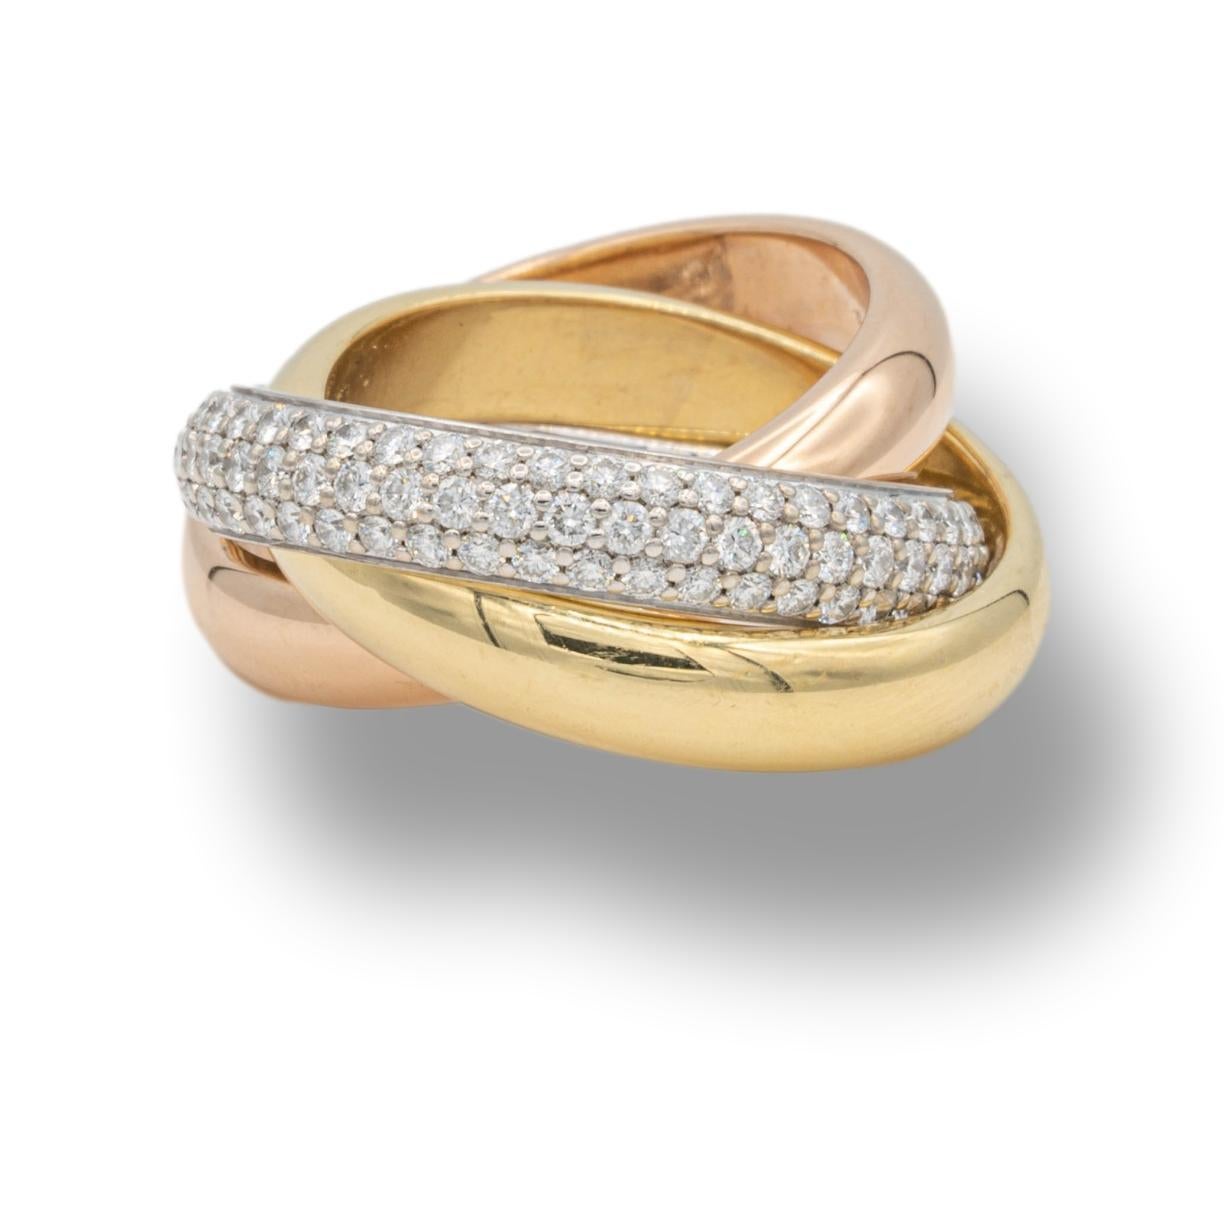 Cartier rolling ring from the classic trinity collection finely crafted in 18 karat yellow, white and rose gold. The white gold band is encrusted with 144 brilliant-cut pave set diamonds totaling 1.25 carats. D - F color VVS clarity 

Stamp: Cartier